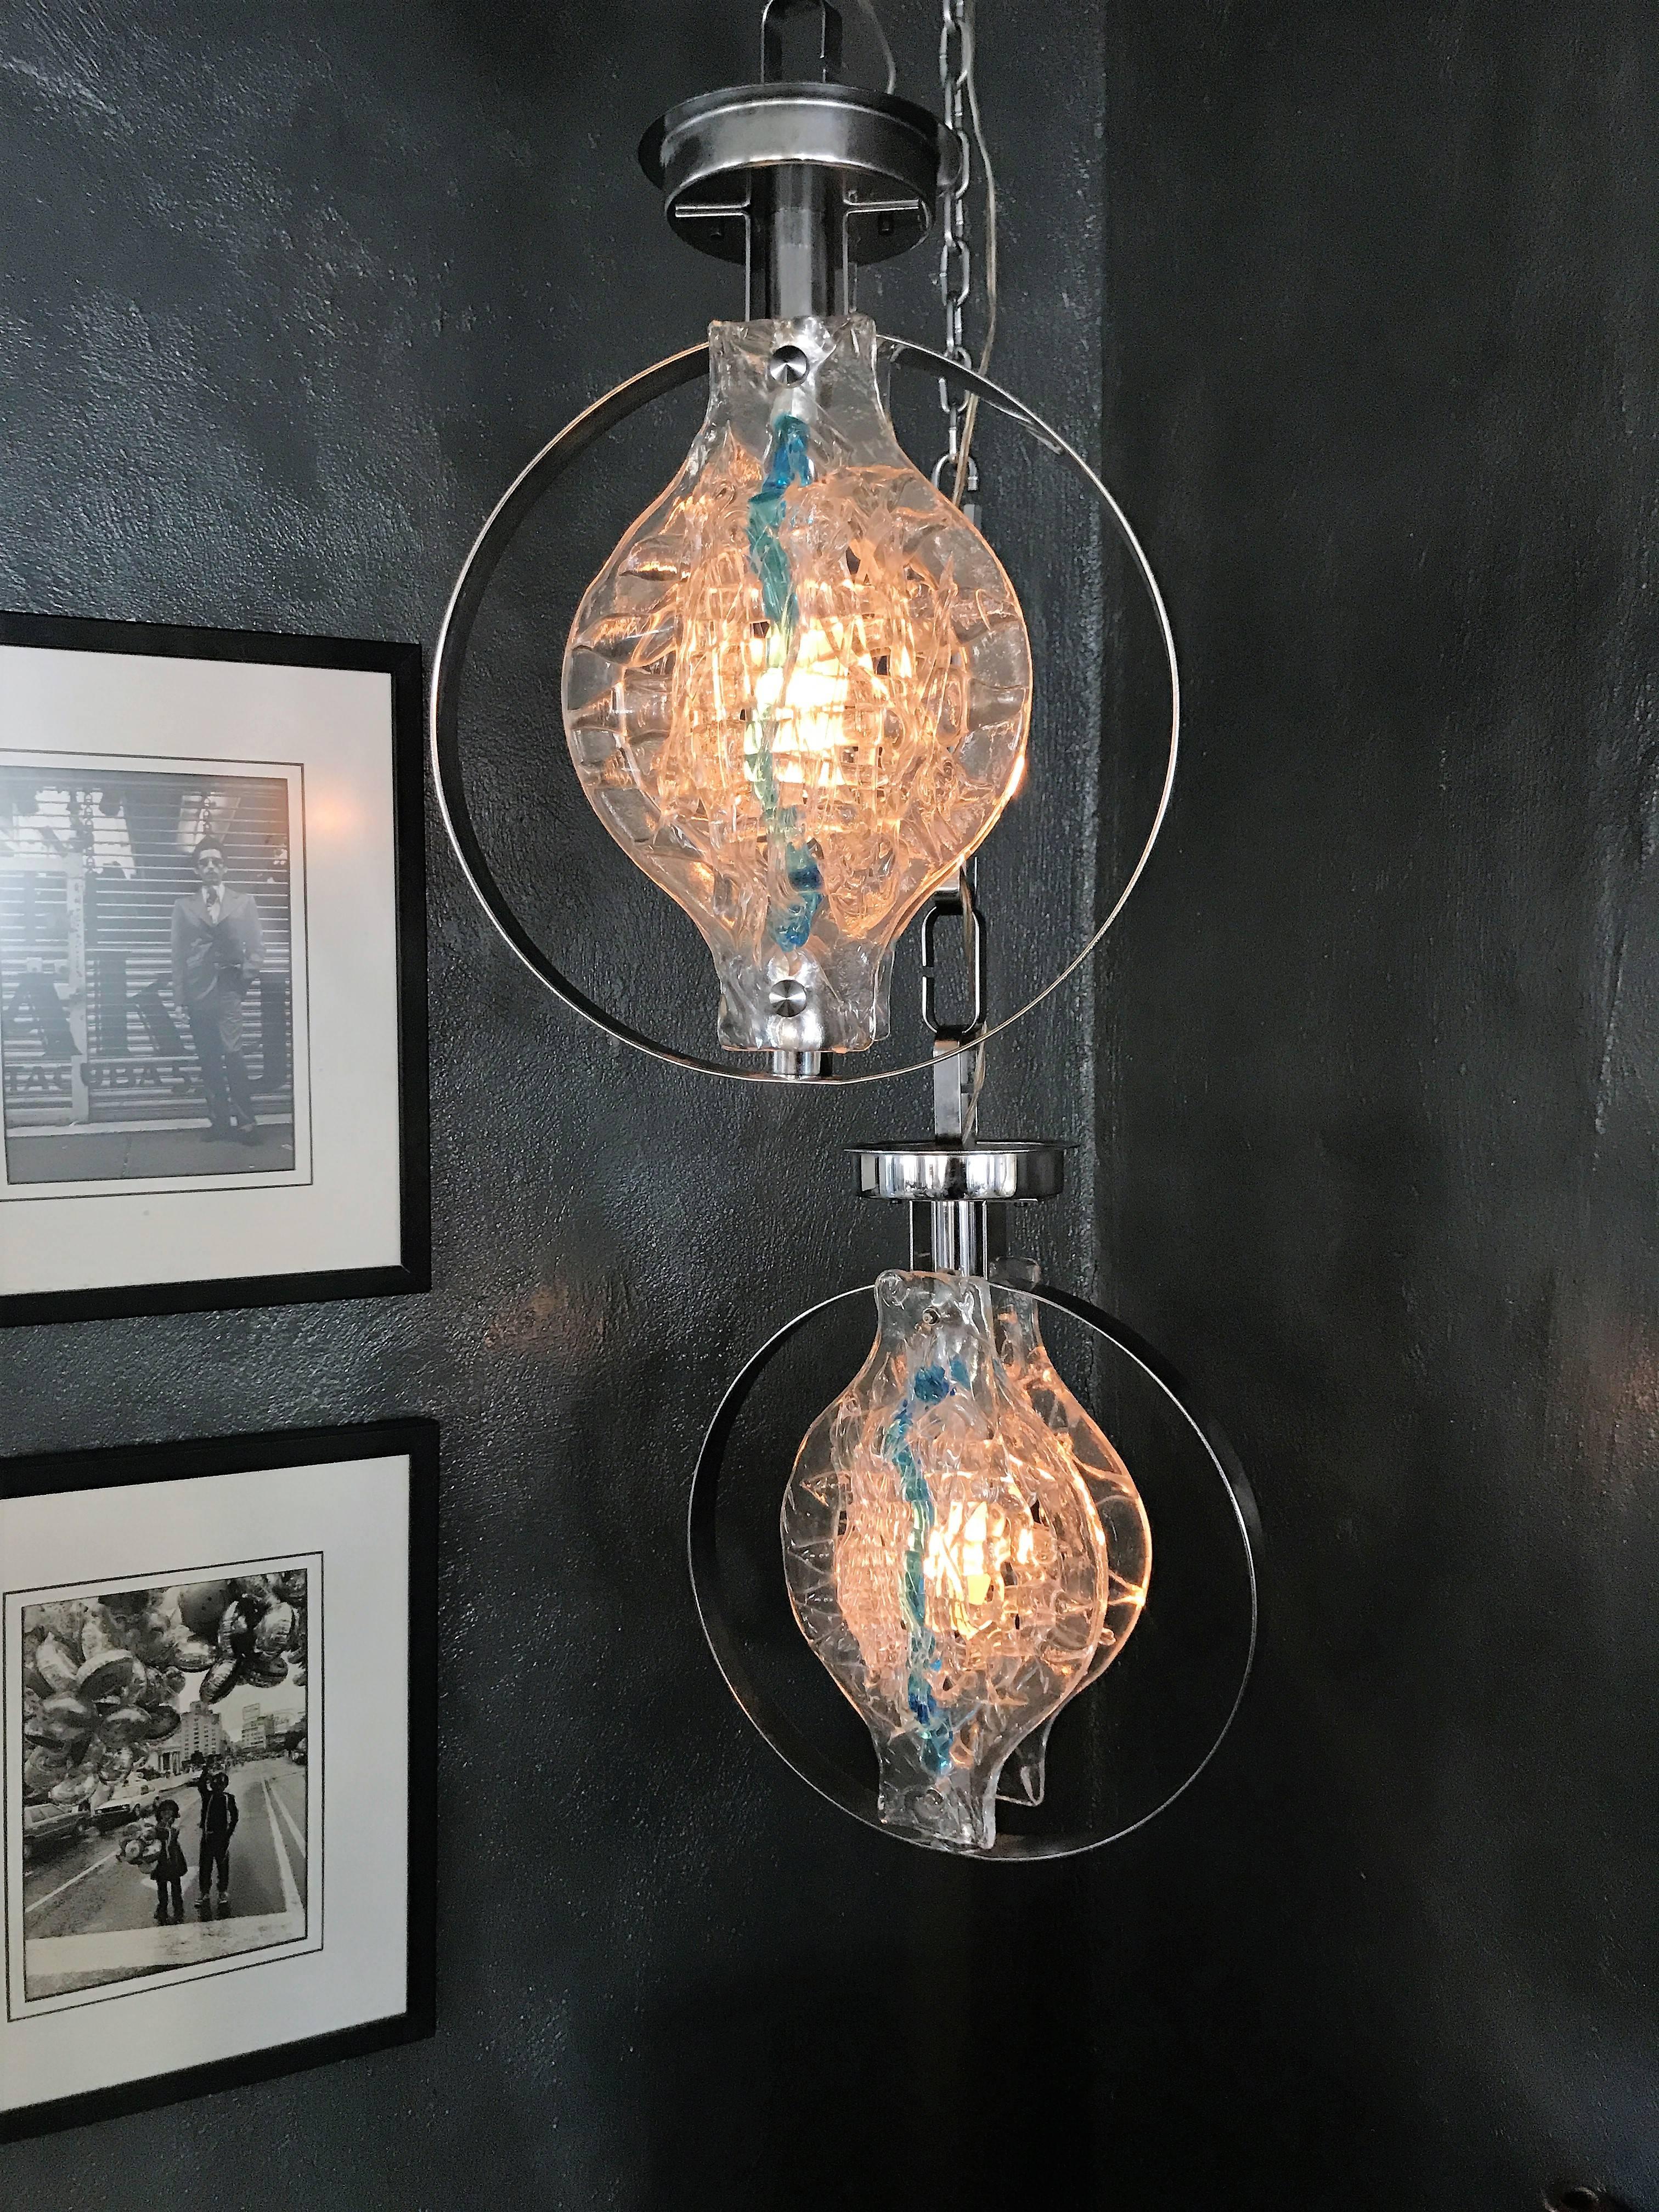 Identical pair of one light chandeliers designed by Angelo Brotto for Esperia, circa 1970.